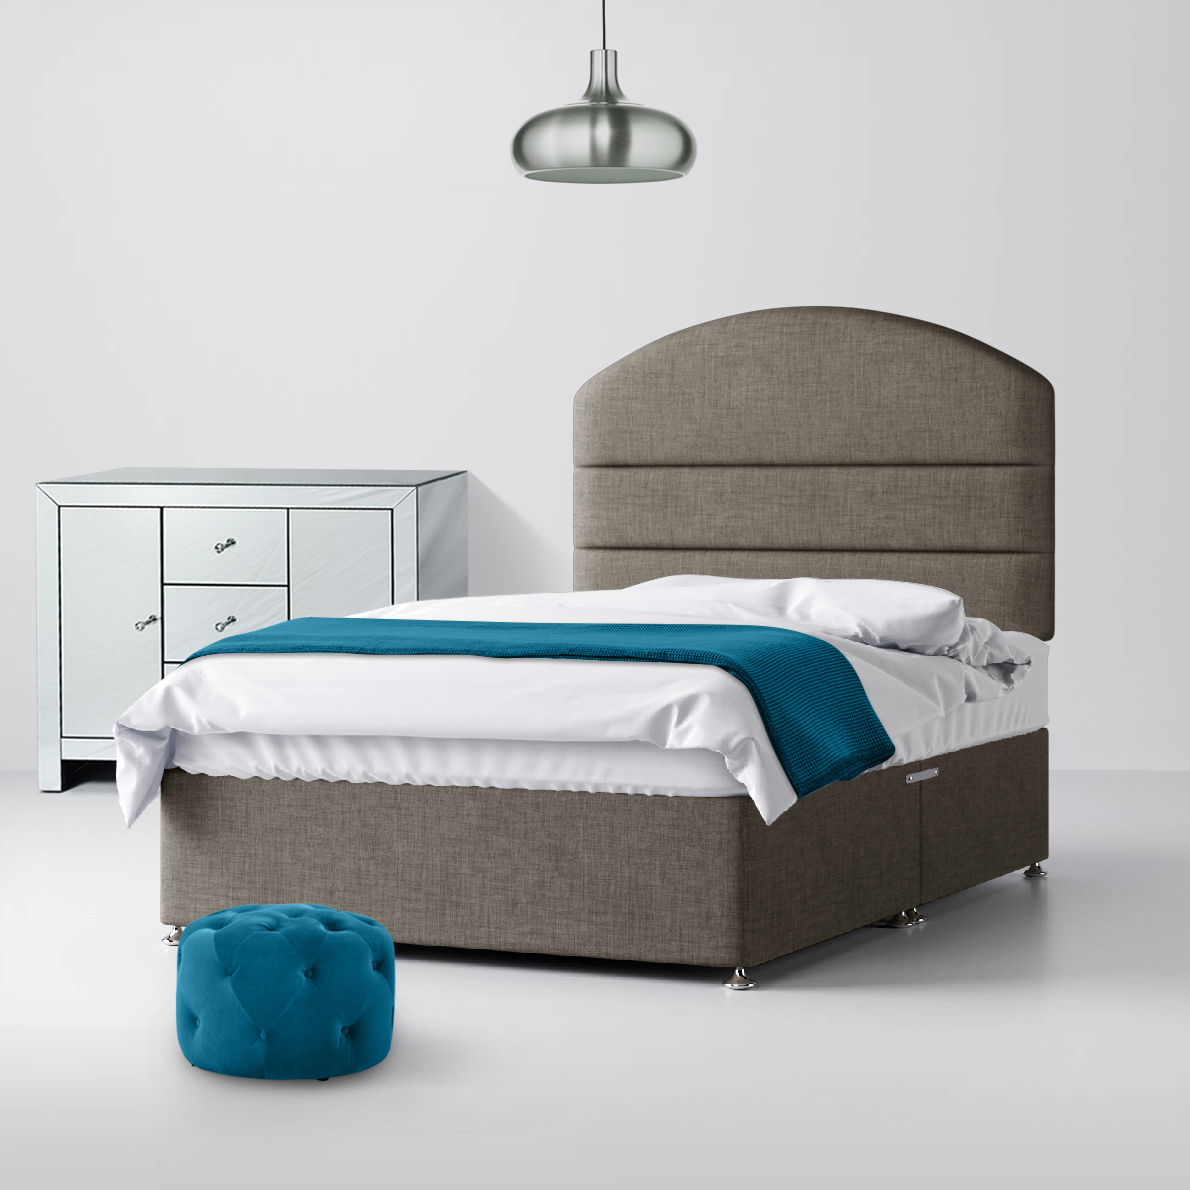 Small Single - Divan Bed and Dudley Lined Headboard - Dark Grey - Fabric - 2ft6 - Happy Beds